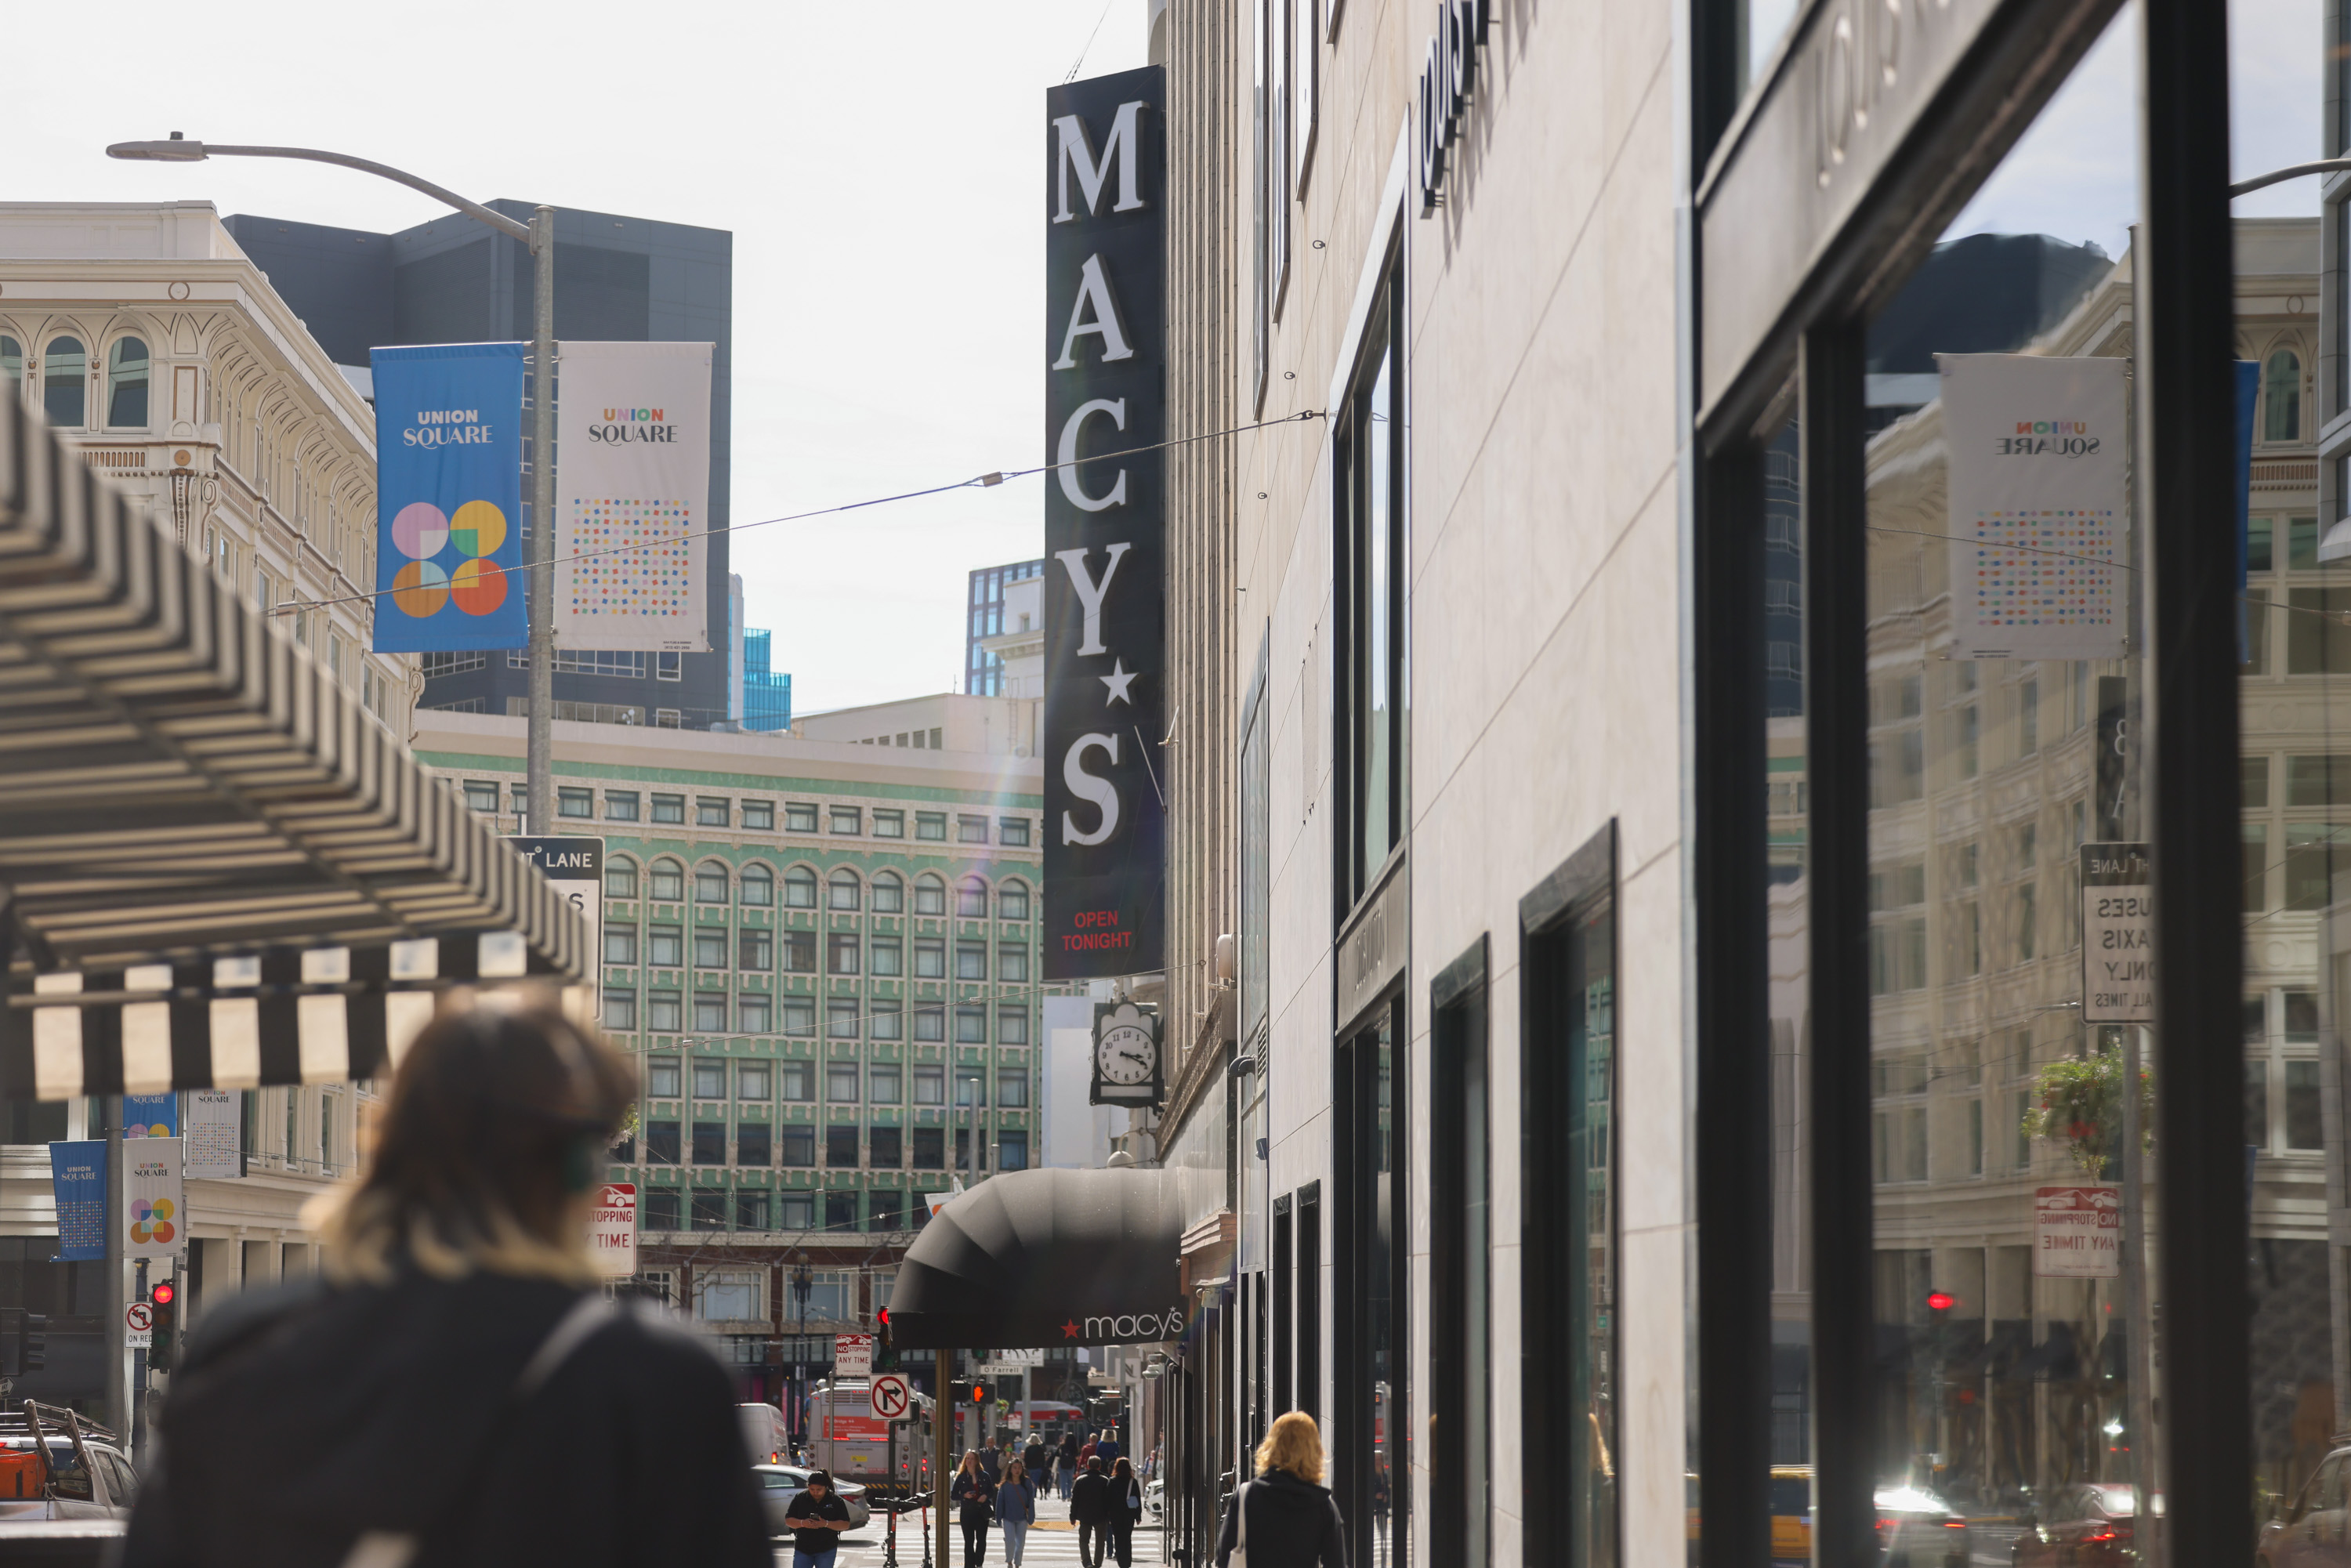 A city street with Macy's signage, walking people, and buildings under a clear sky.